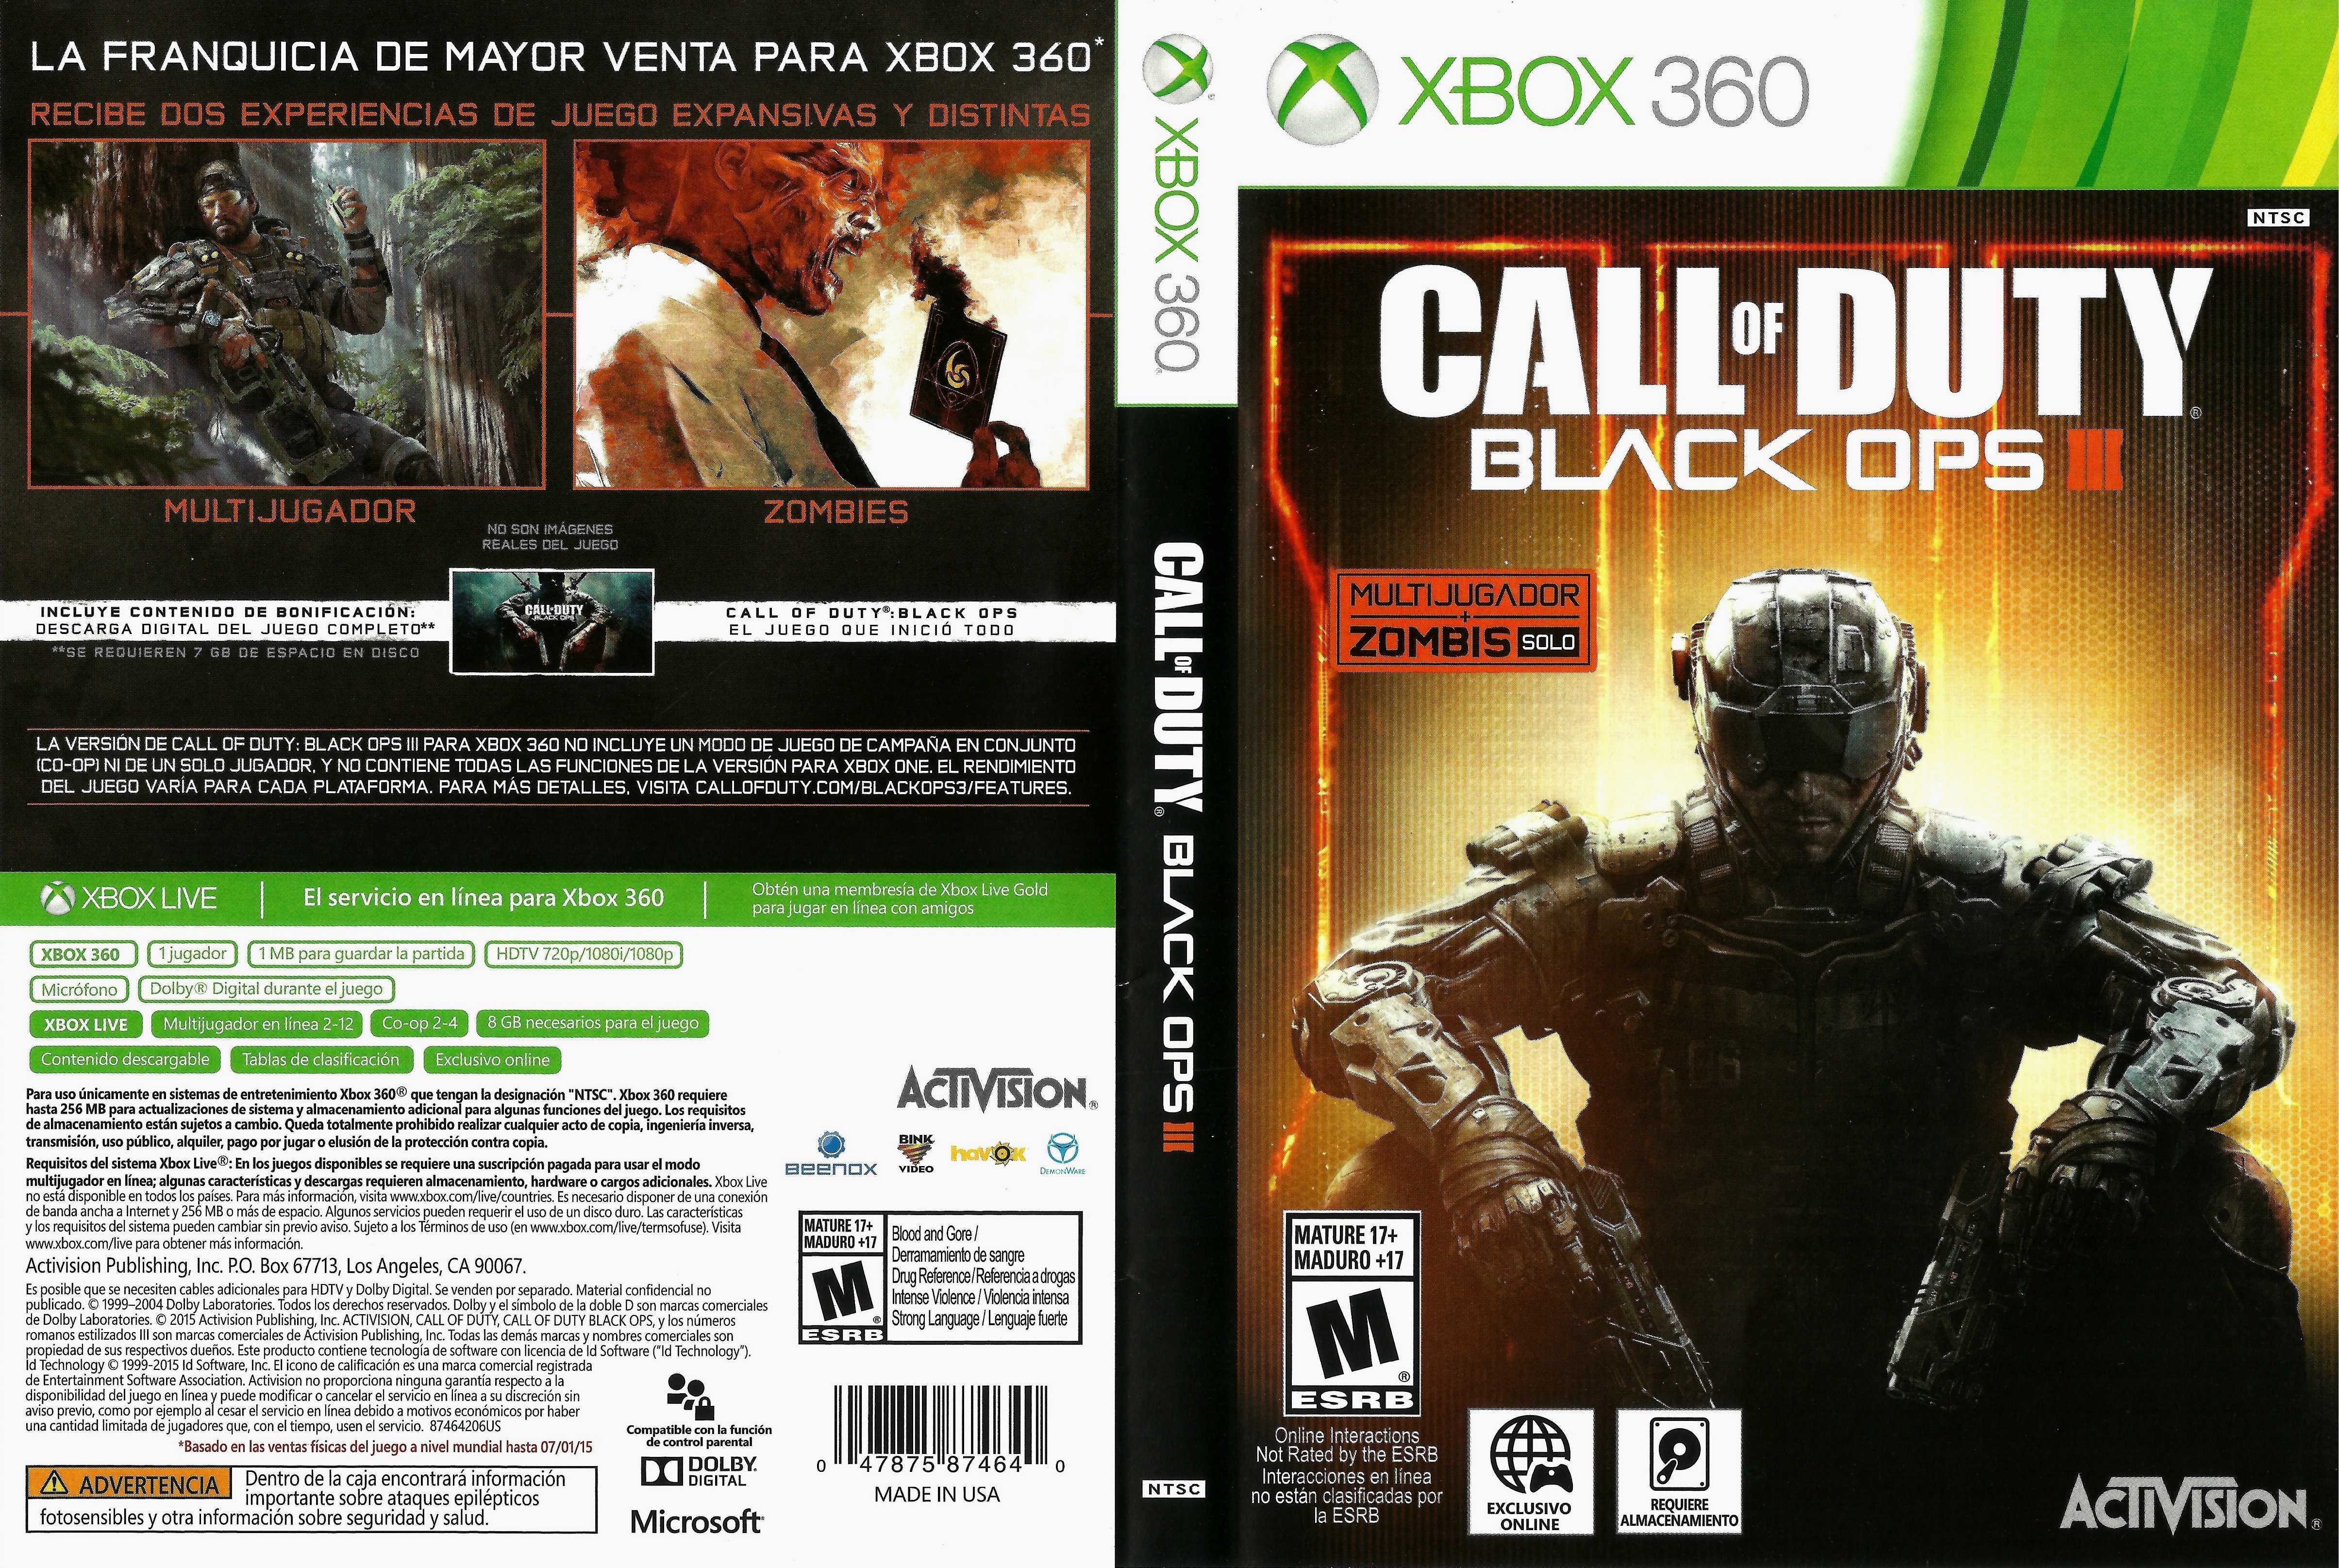 Диск игры call of duty. Black ops Xbox 360 обложка. Cod Black ops 3 Xbox 360. Call of Duty Black ops 3 диск Xbox 360. Call of Duty 3 Xbox 360 диск.